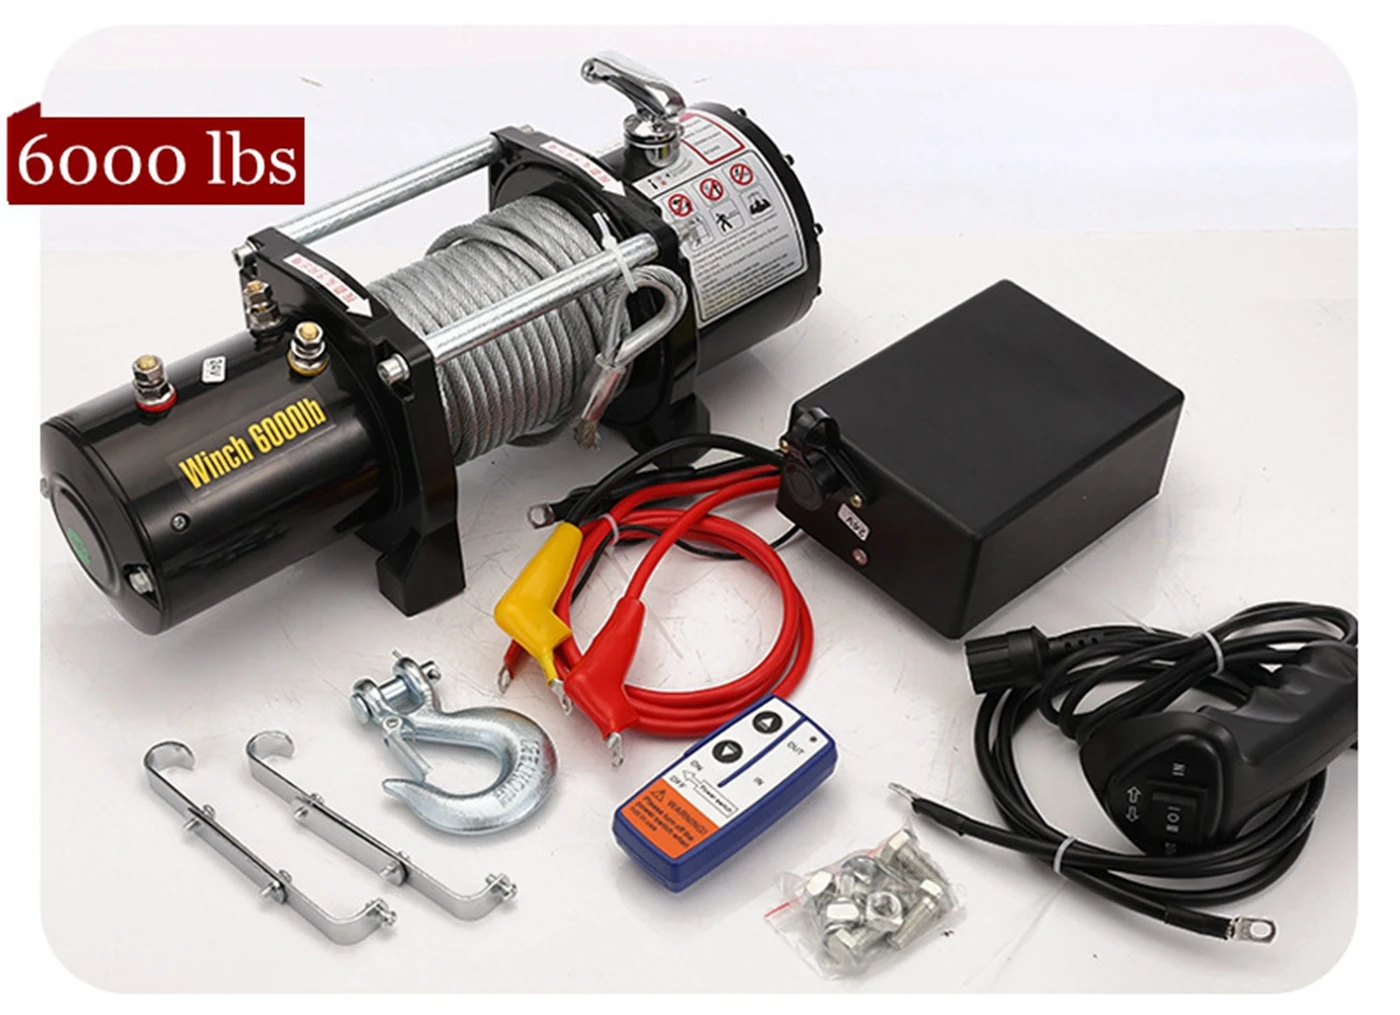 12V24V 6000 lbs vehicle self-rescue off-road winch off-road vehicle winch on-board crane electric winch enlarge